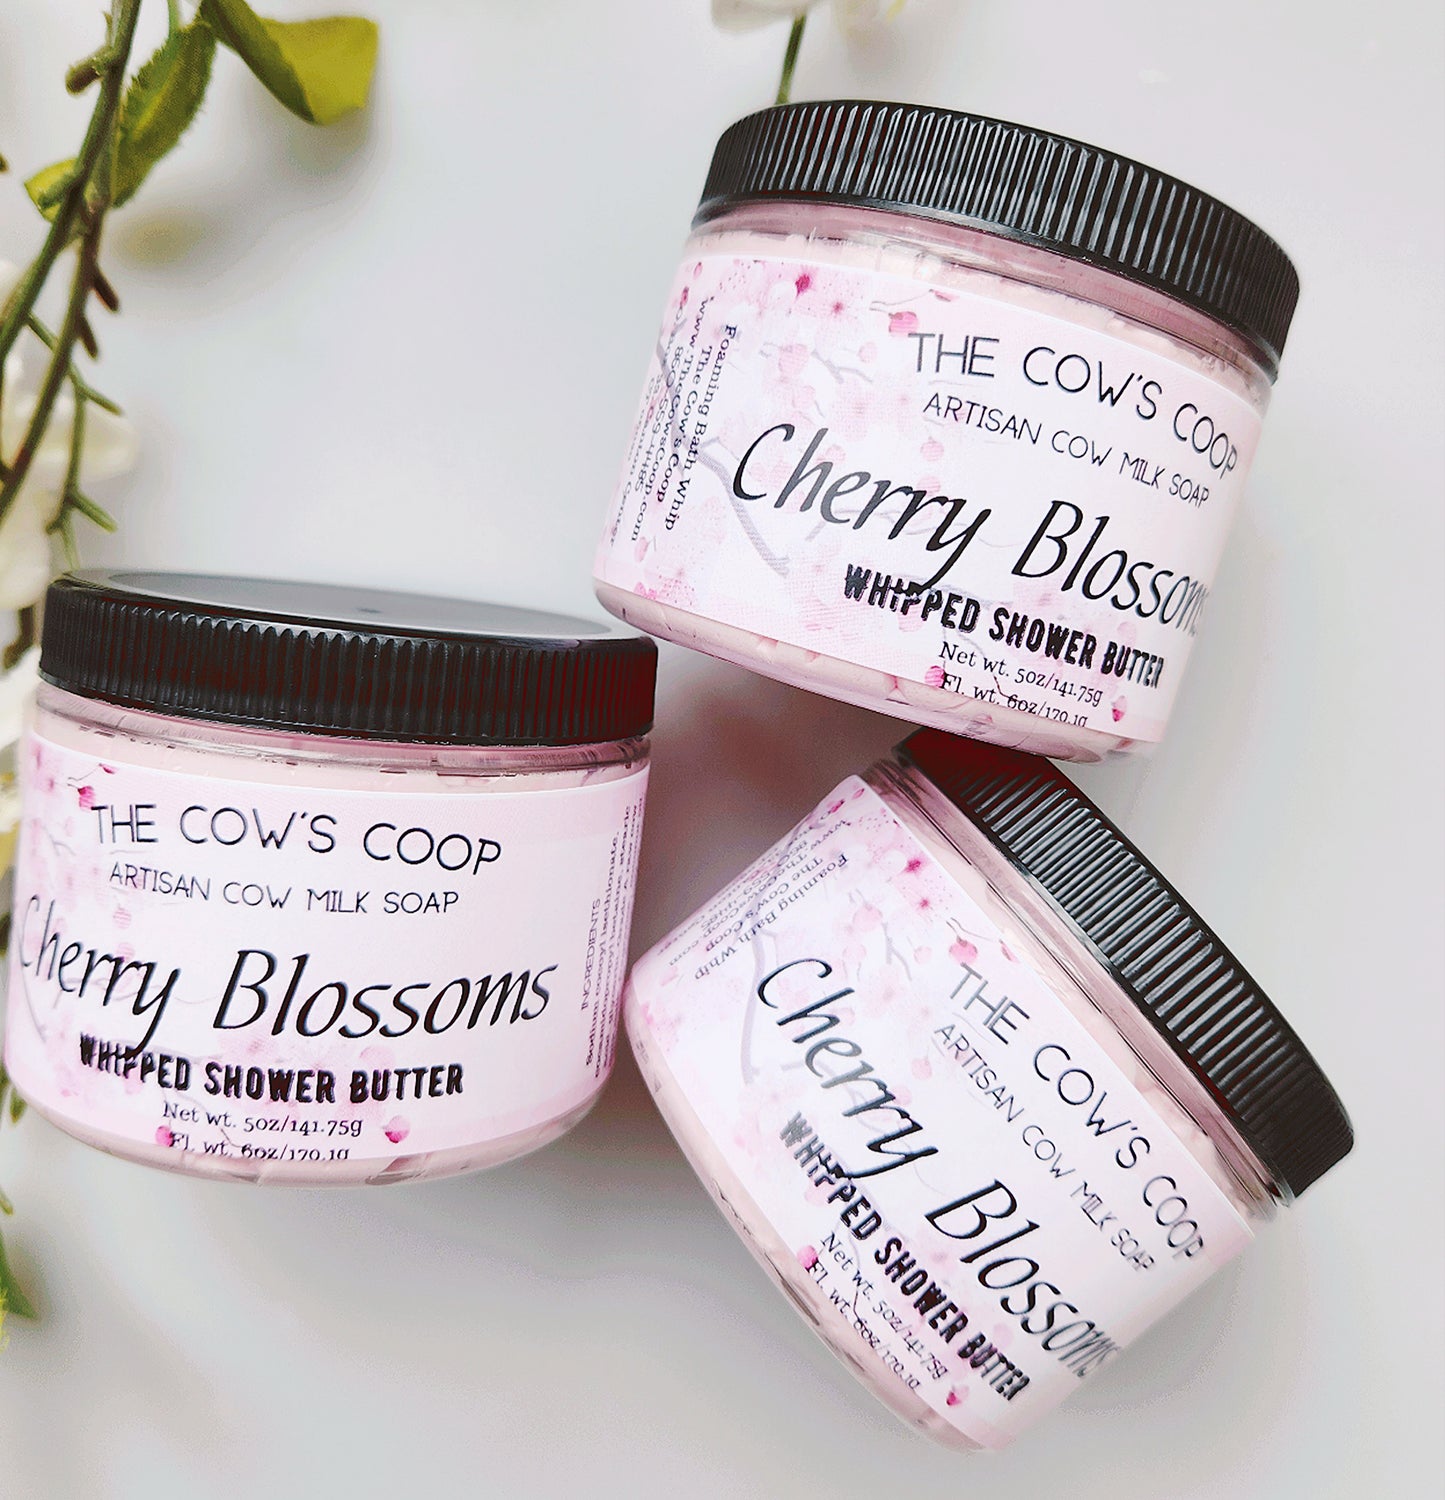 Cherry Blossoms - Whipped Shower Butter Cow Milk Soap